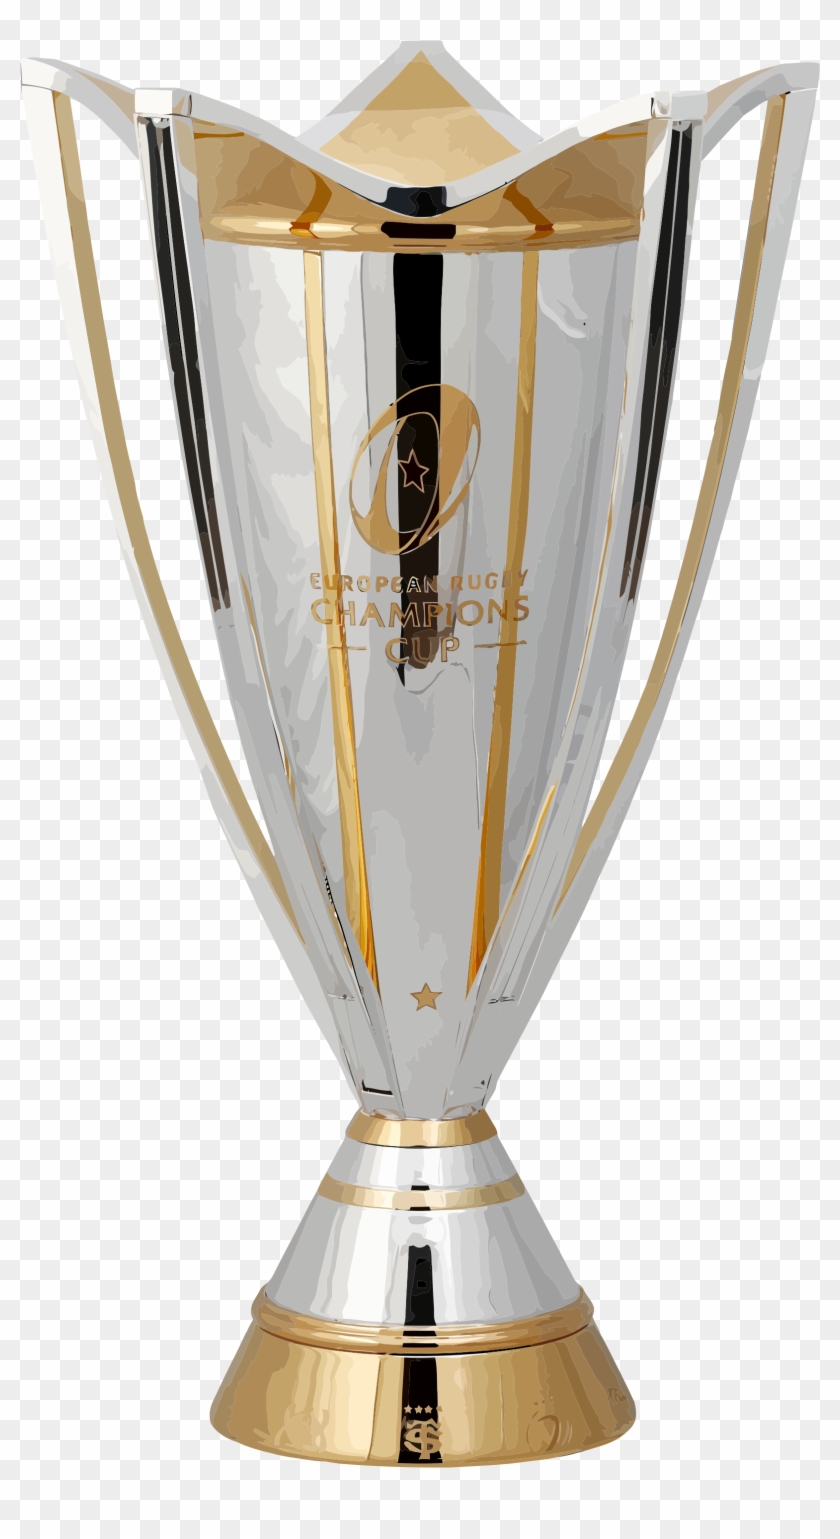 Trophy Png 16, - European Rugby Champions Cup Trophy #611048